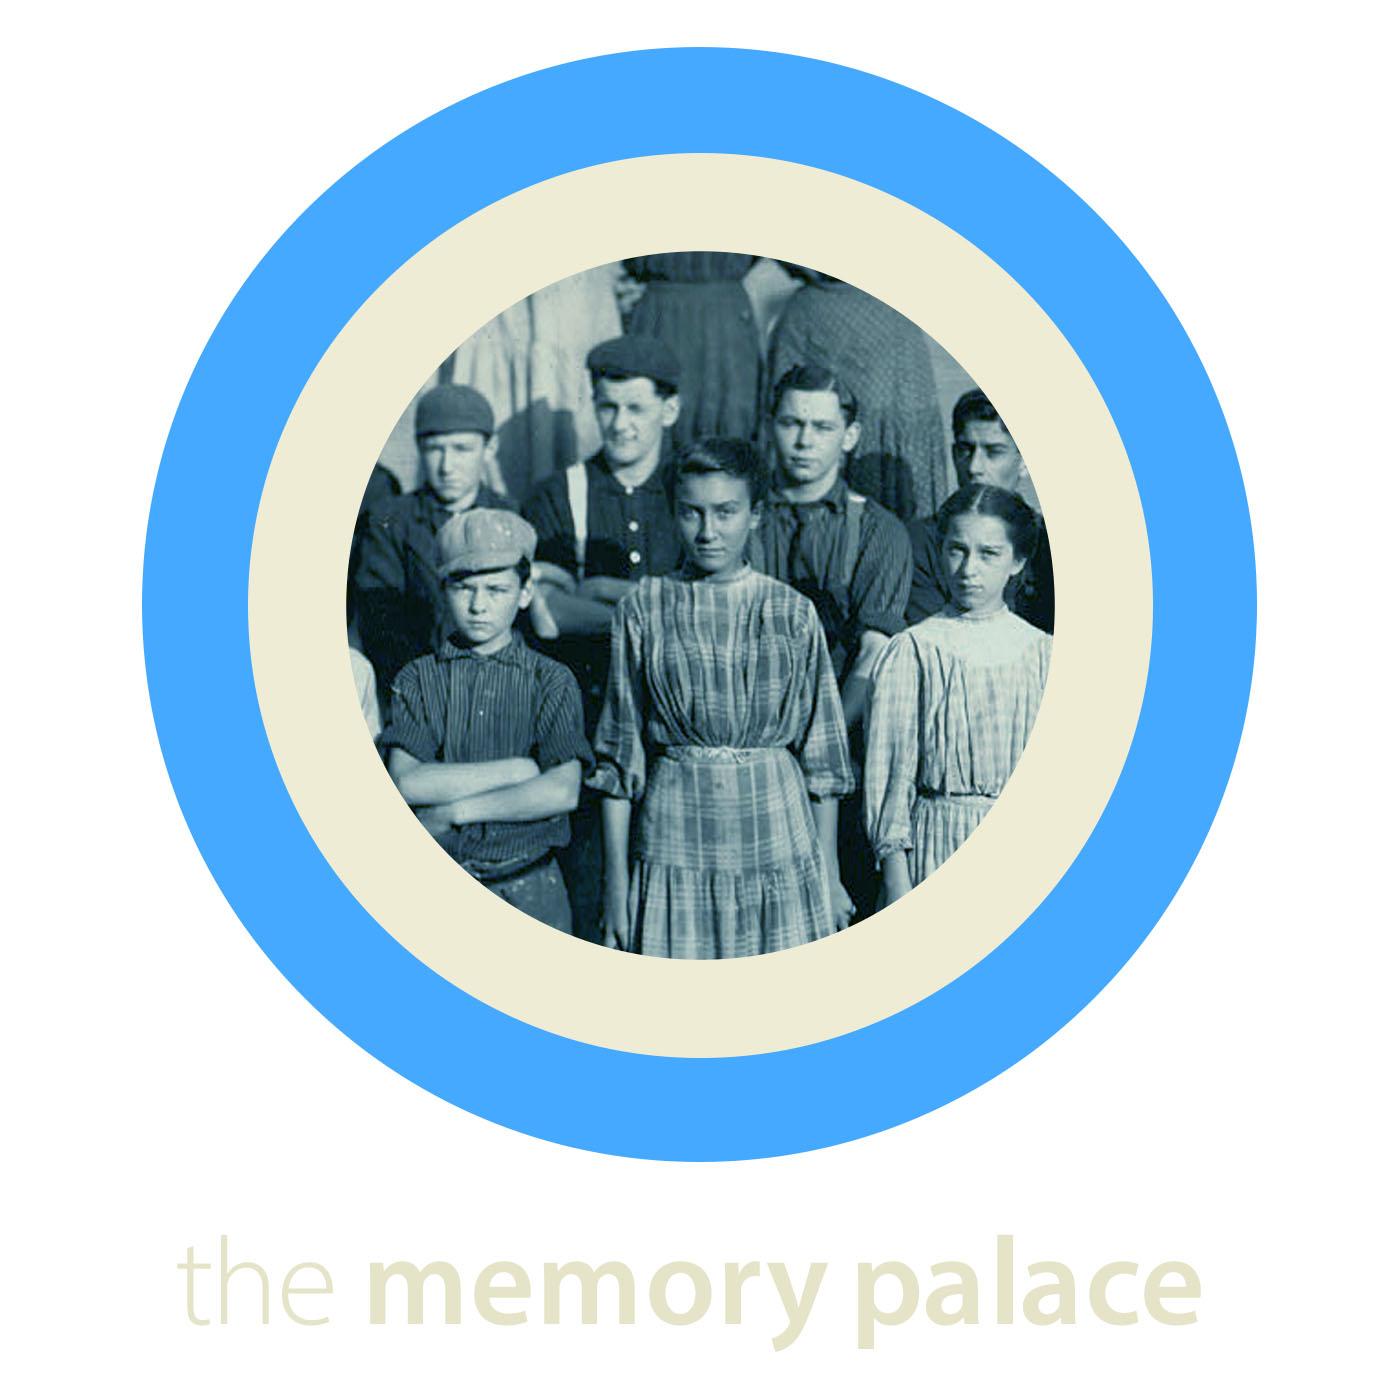 Thumbnail for "A Conversation About the Memory Palace with Robert Krulwich".